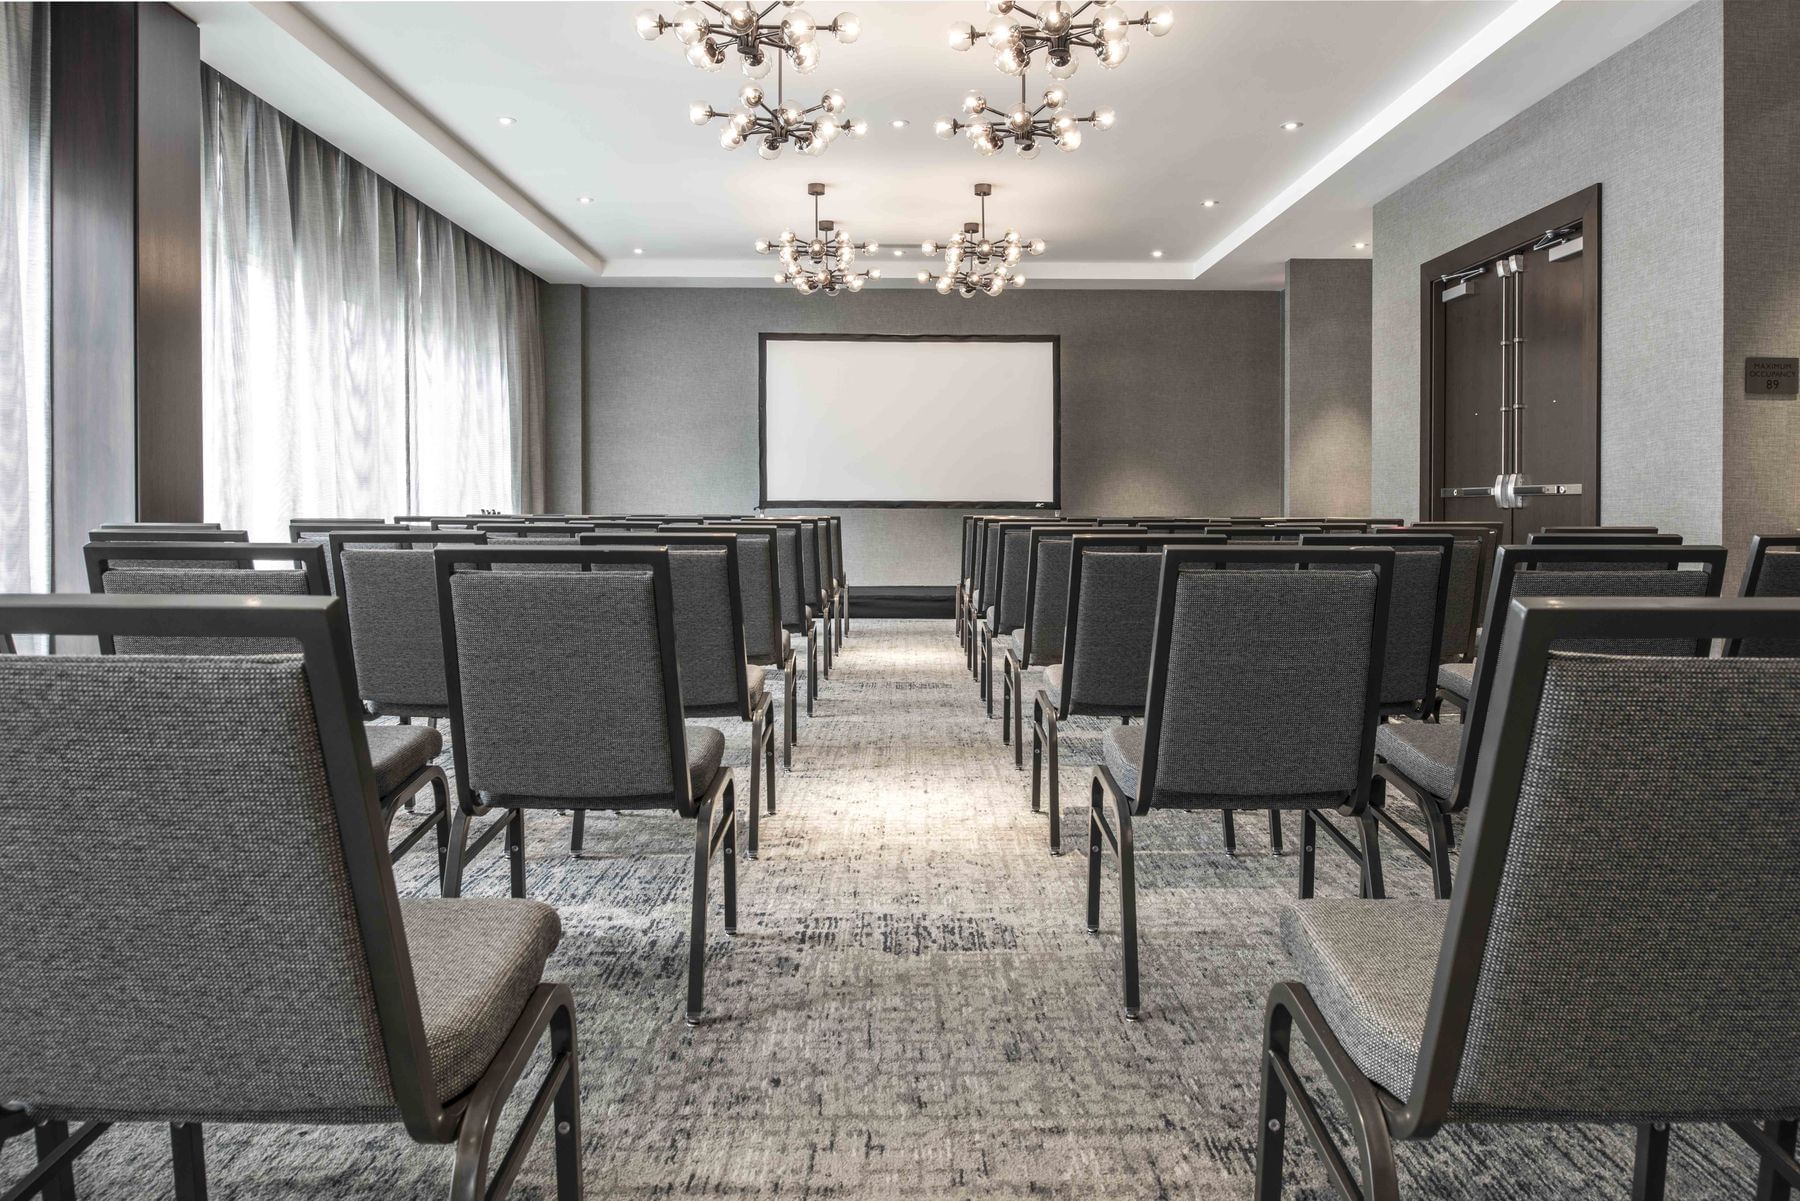 Meeting space set theater style with projector screen 